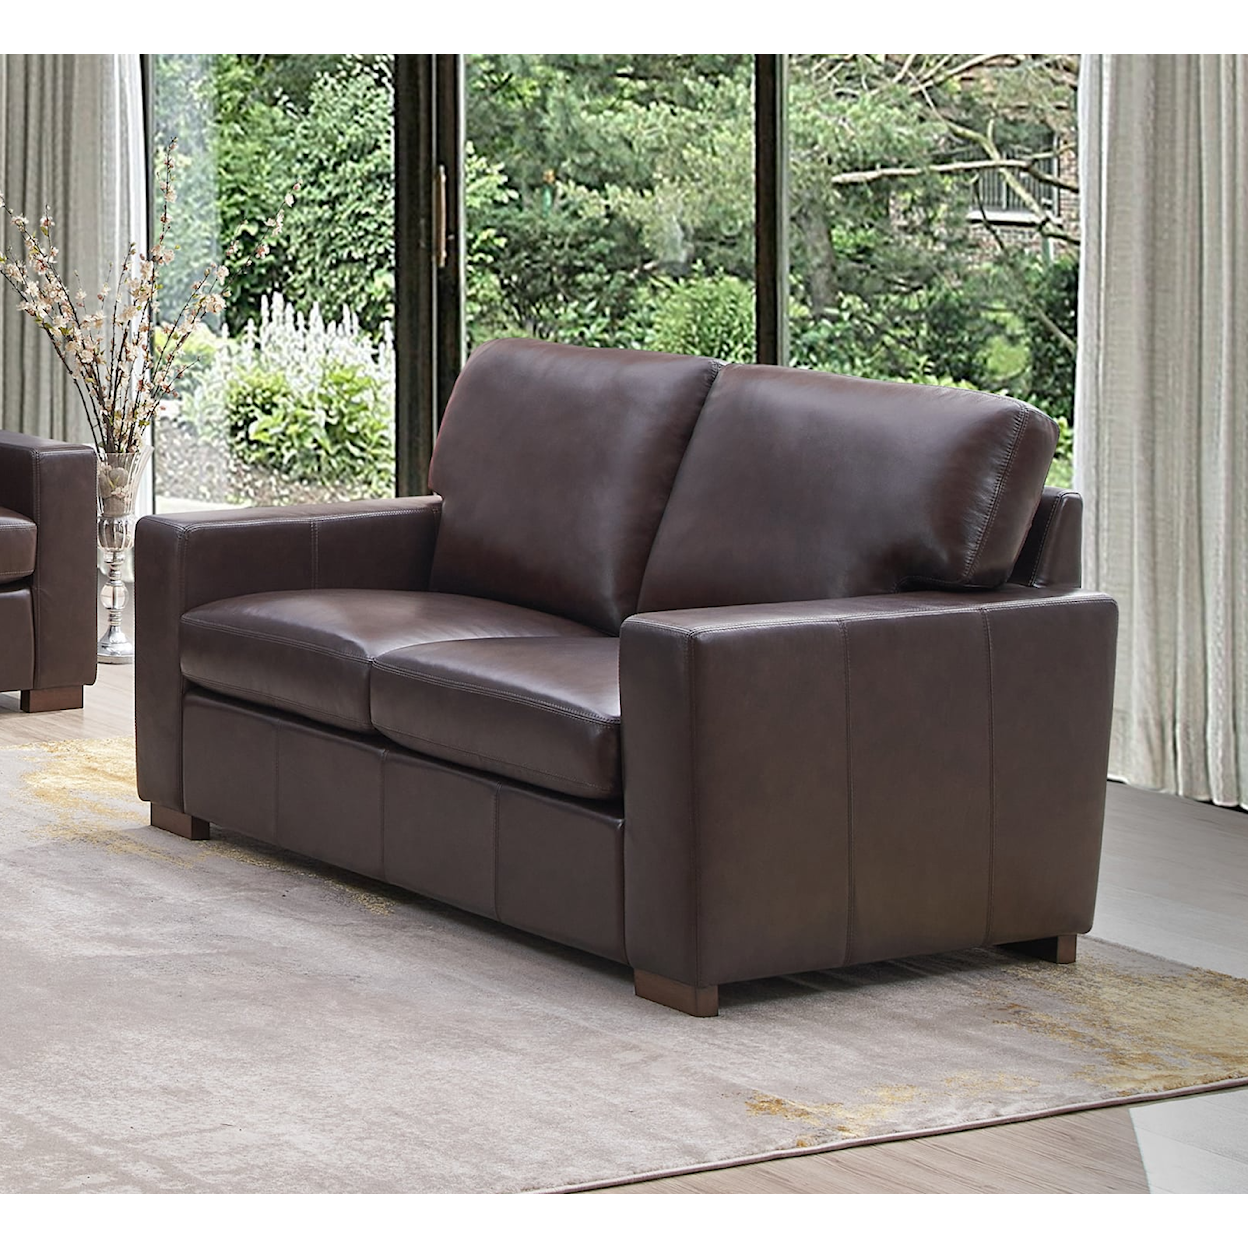 New Classic Marco Leather Loveseat